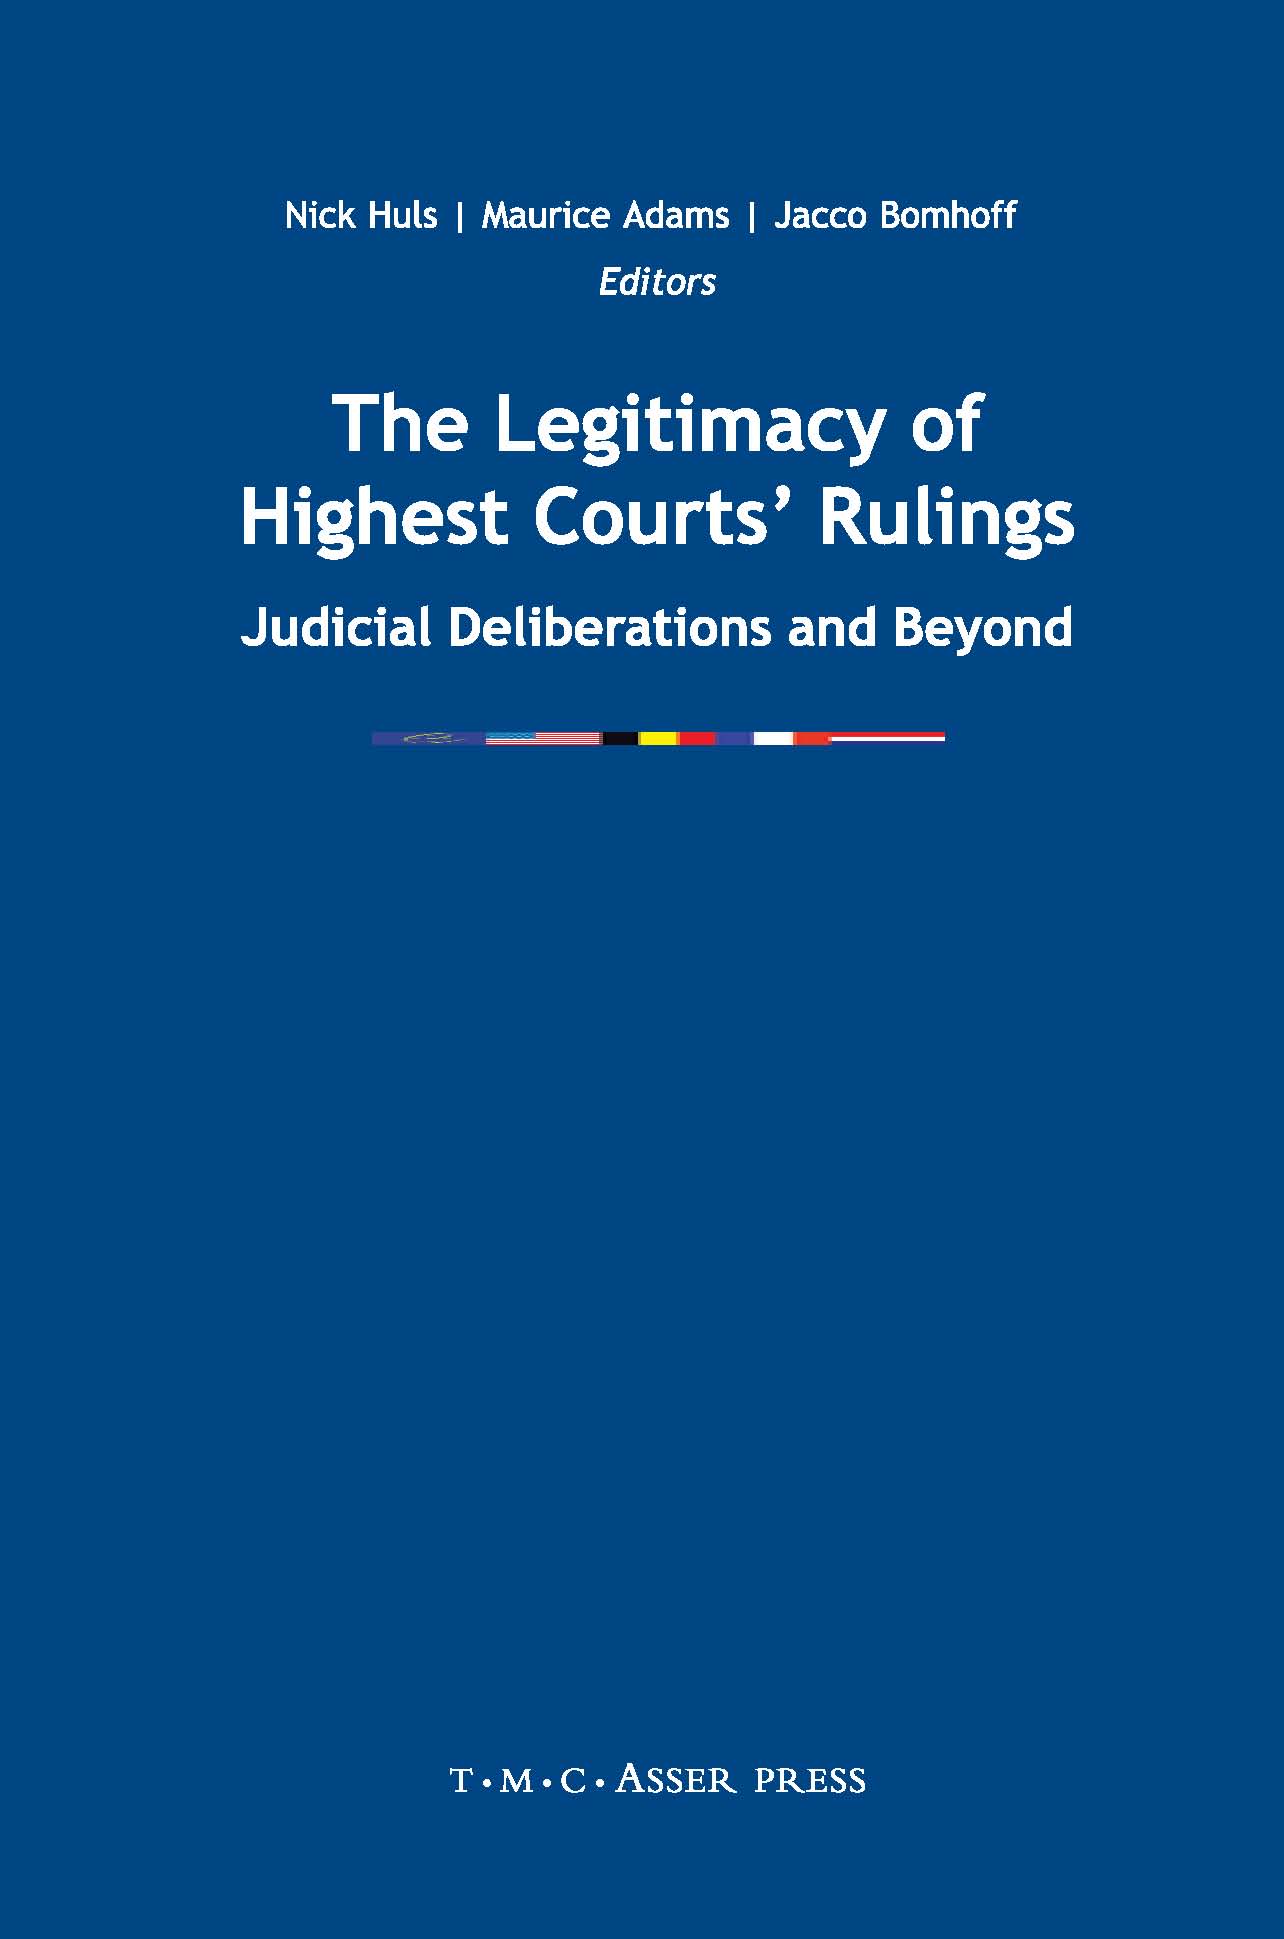 The Legitimacy of Highest Courts’ Rulings - Judicial Deliberations and Beyond